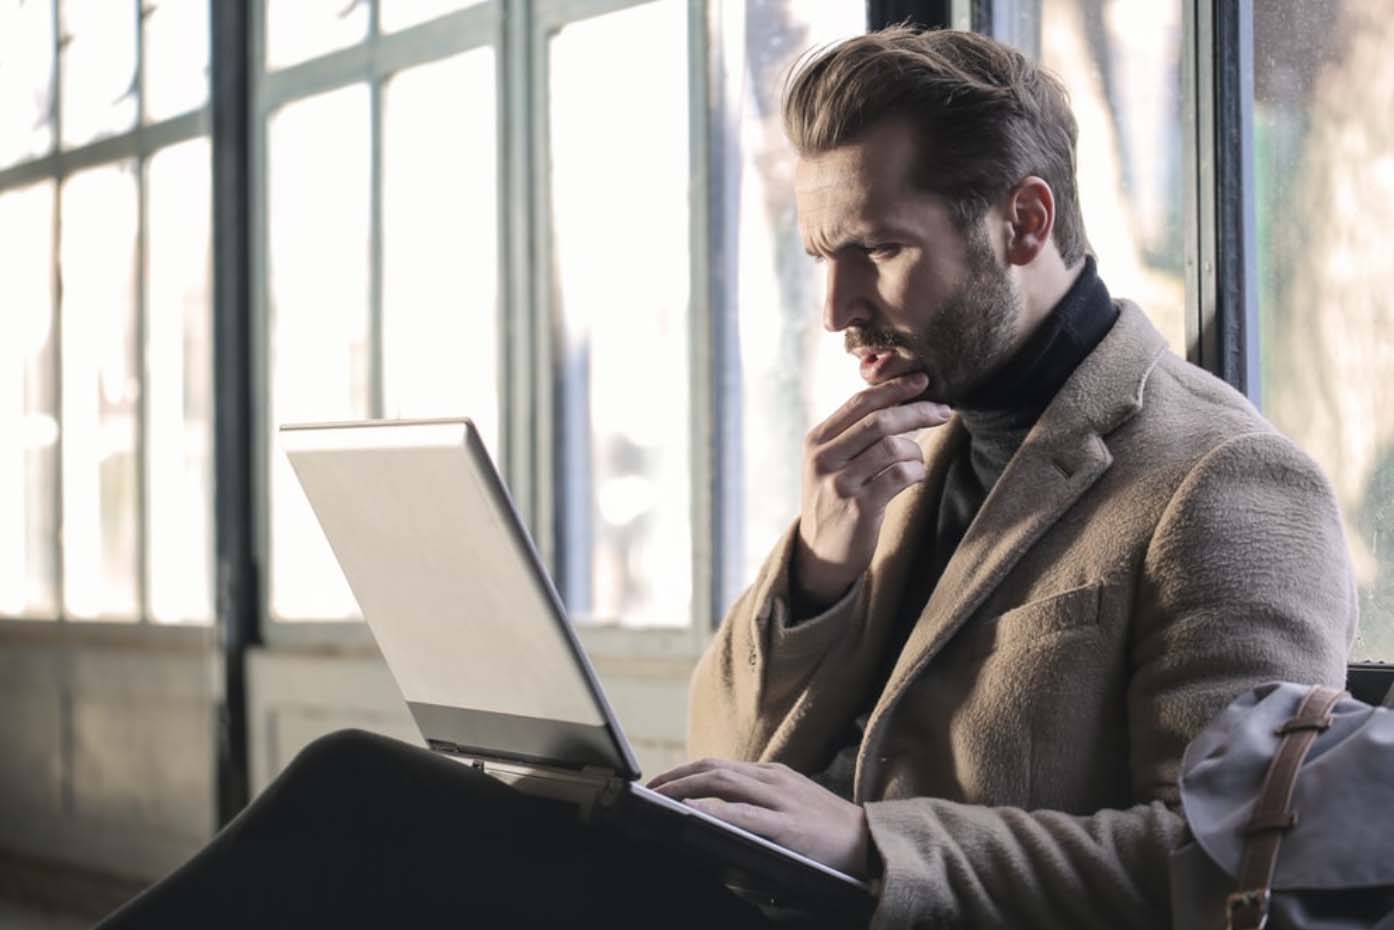 White male professional with slicked-back hair, black turtleneck, and brown coat holding laptop and confused by disorganized code